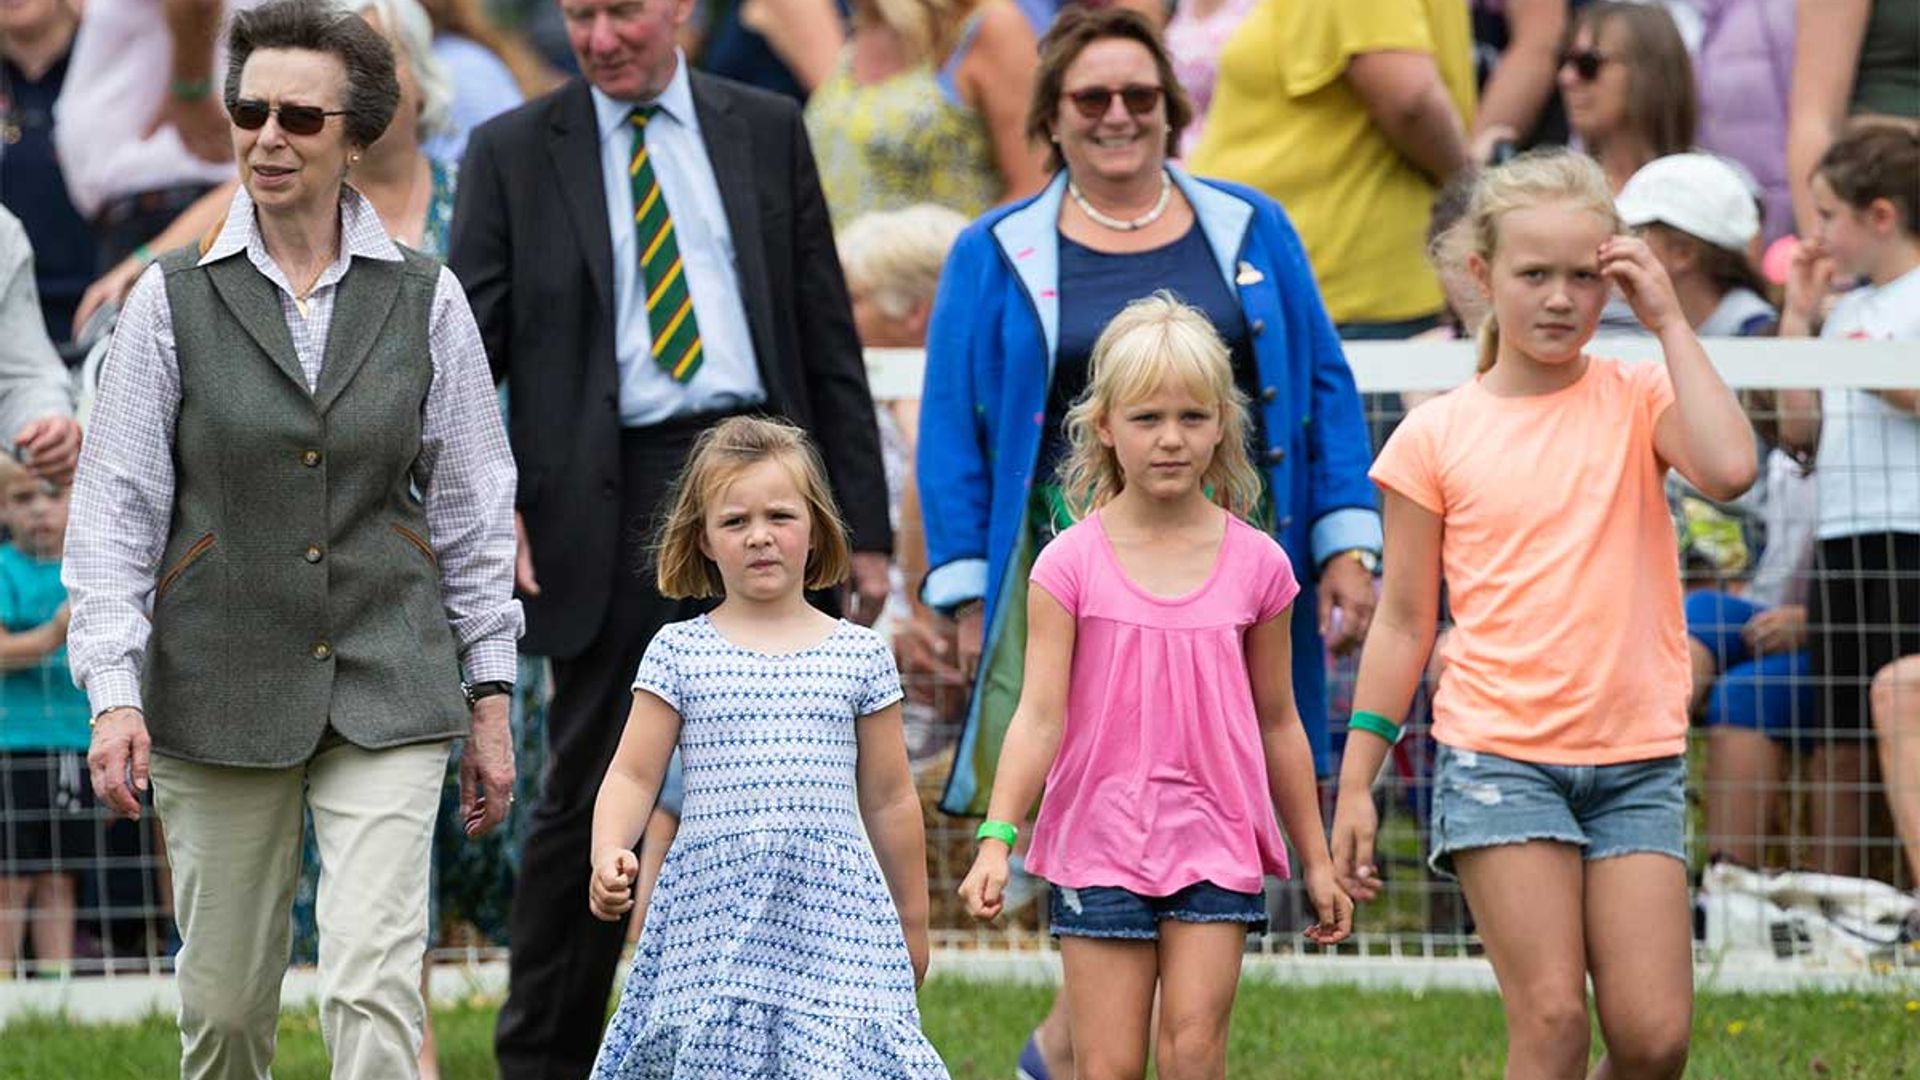 Princess Anne joined by granddaughters during daily horse rides at Gatcombe Park